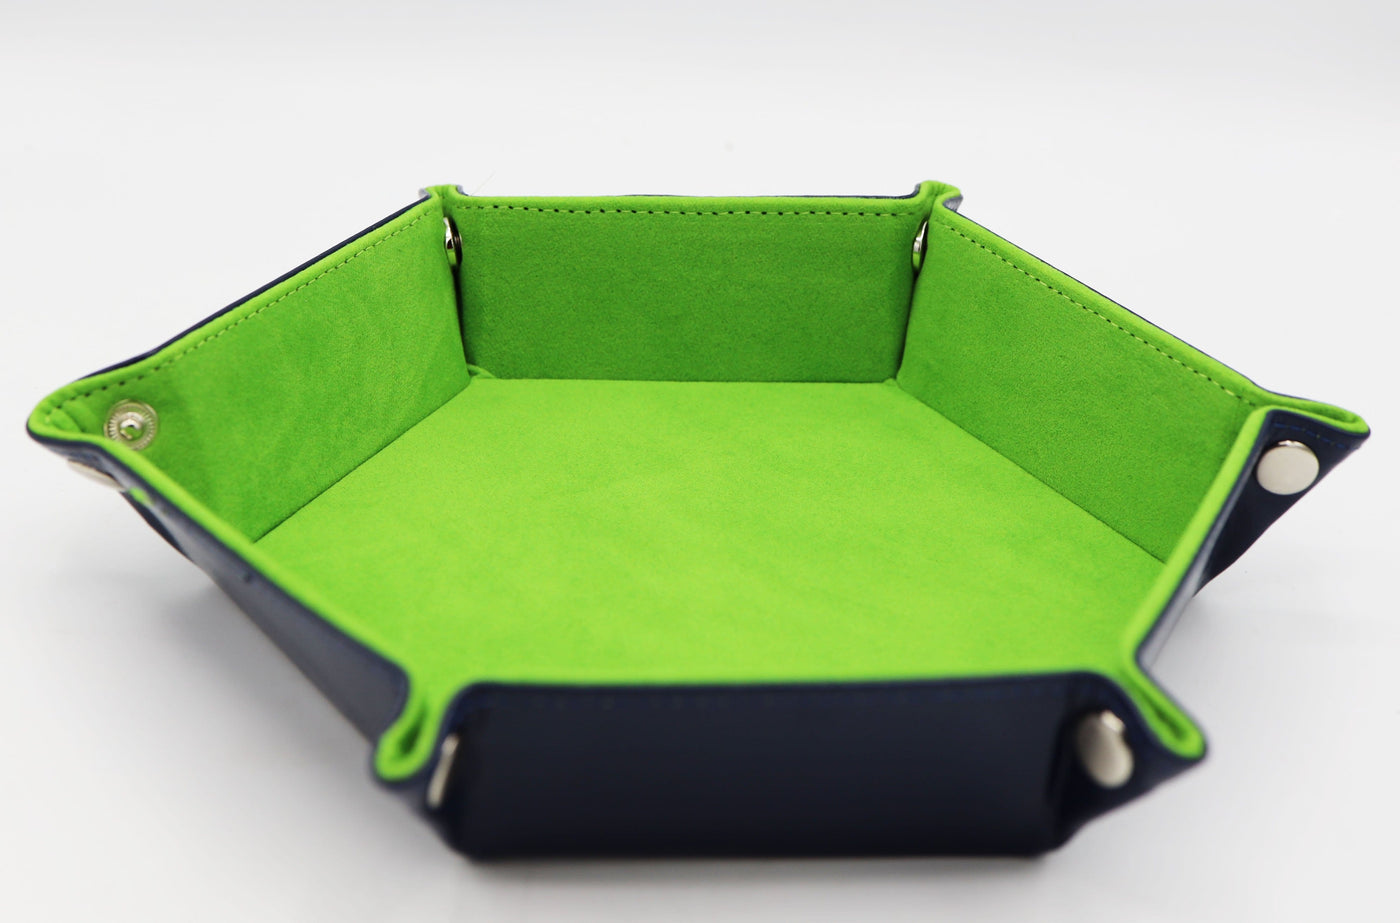 Leatherette & Velvet Hex Dice Tray (Navy with Lime) Dice Tray Foam Brain Games